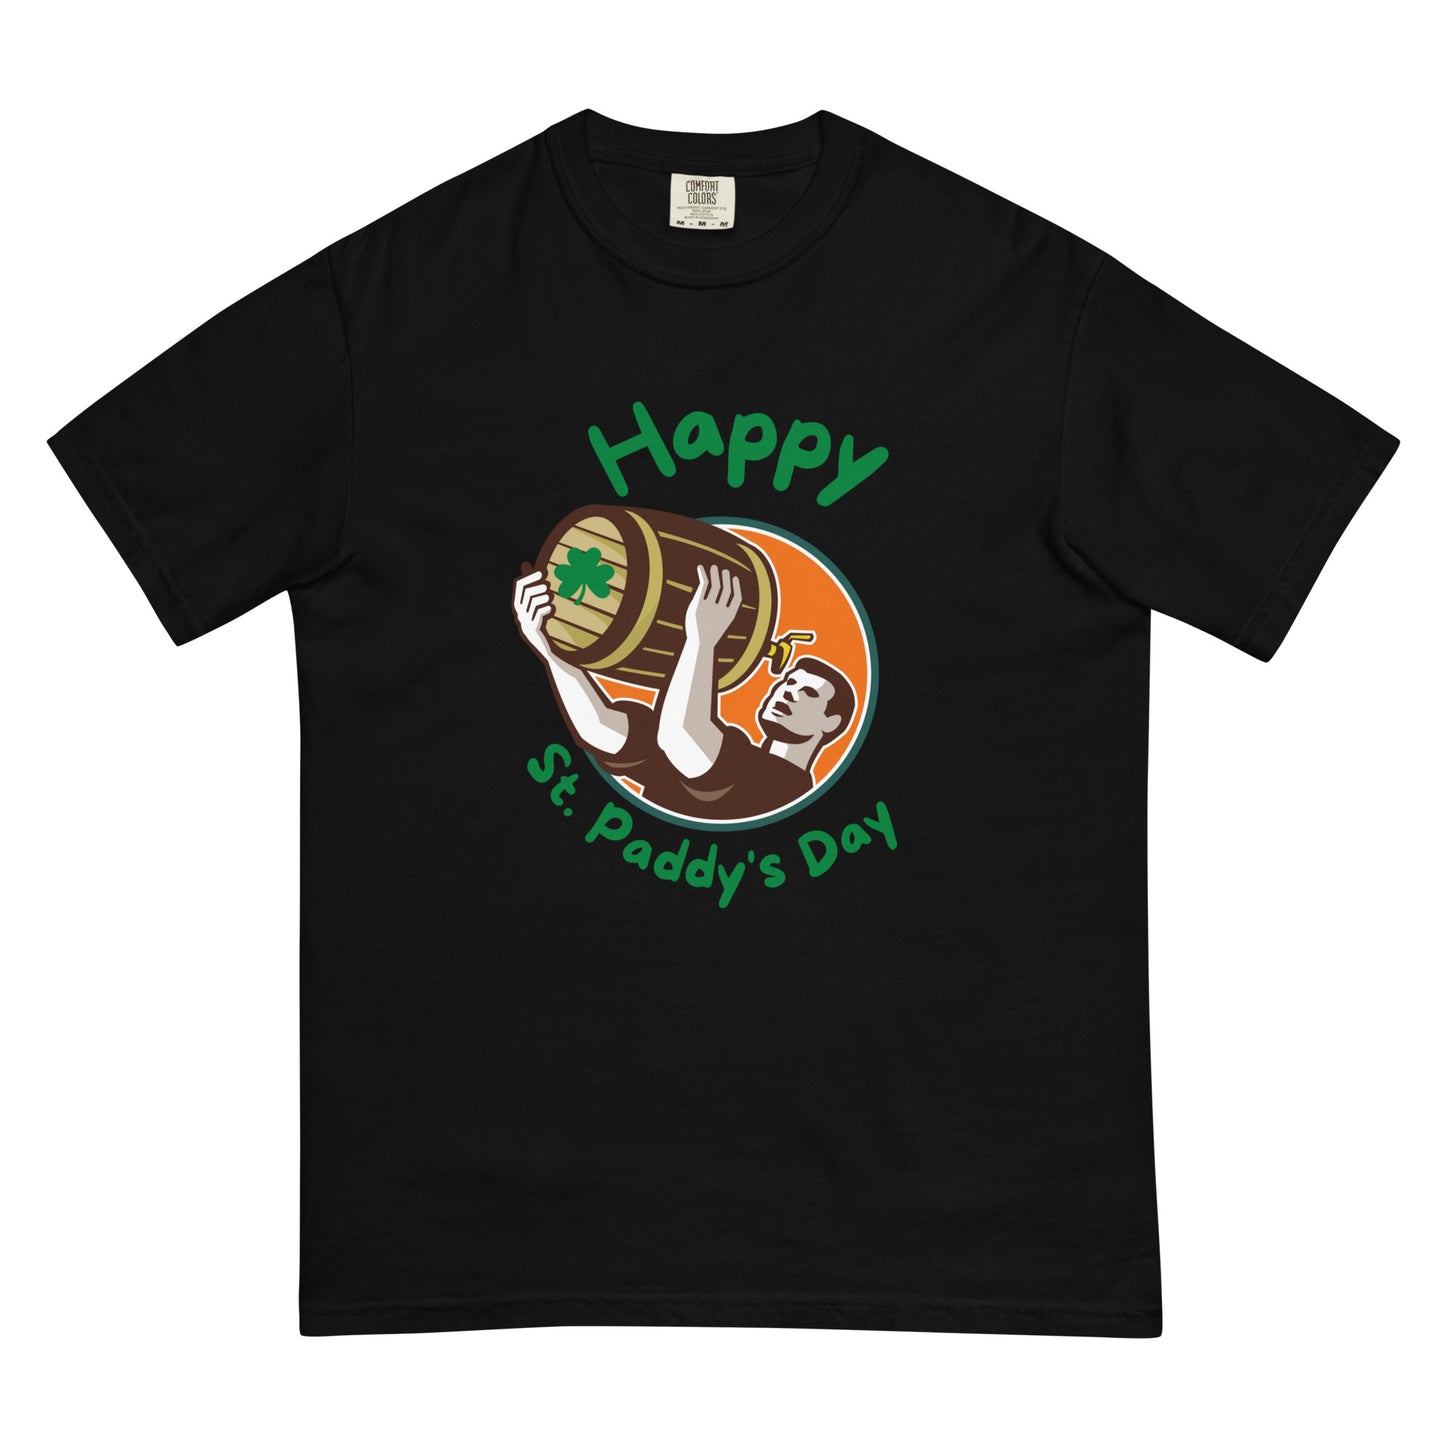 Happy St. Paddy's Day Men’s garment-dyed heavyweight t-shirt